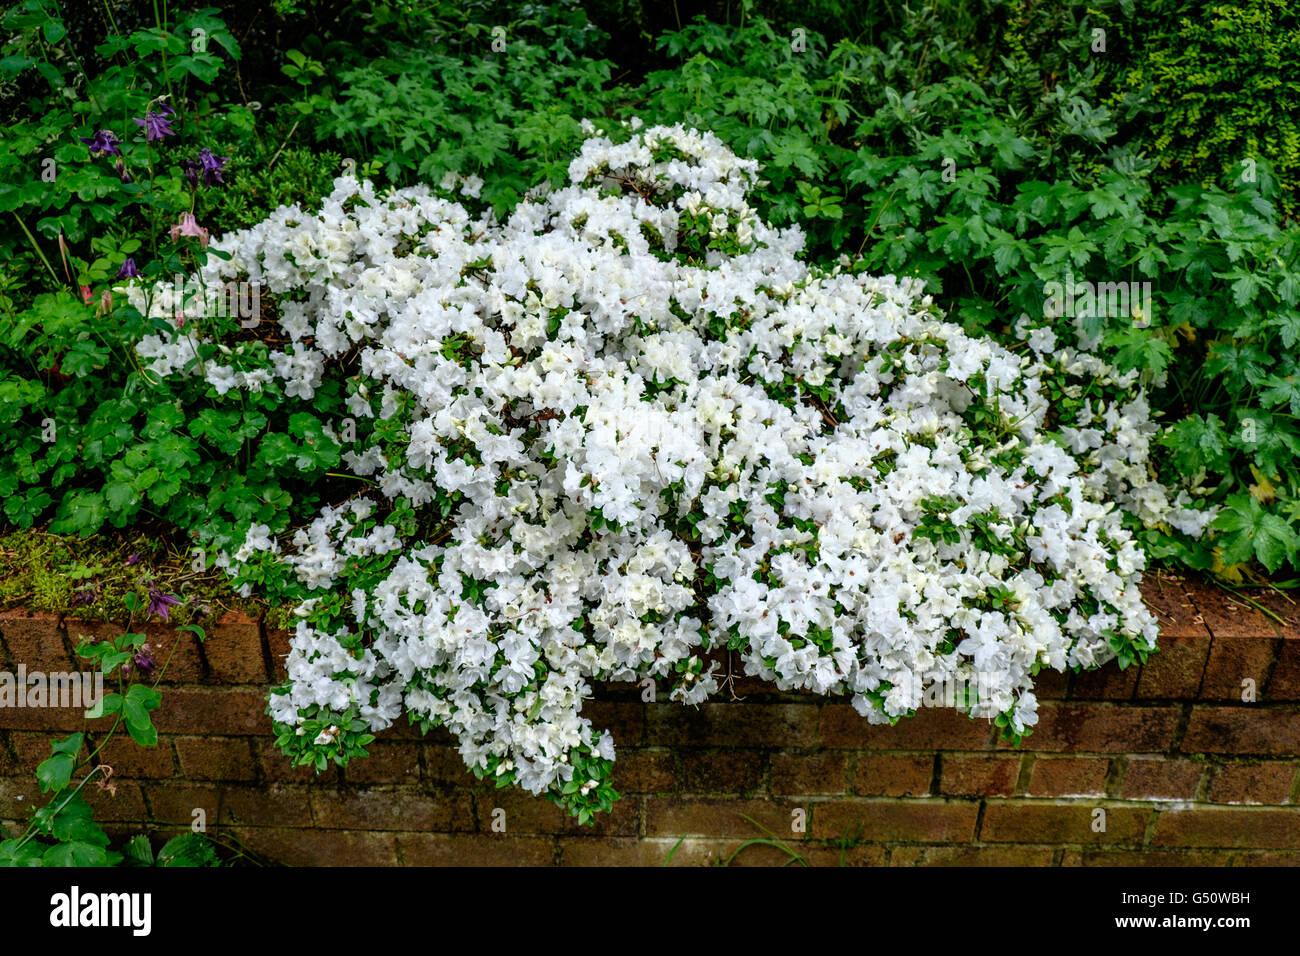 White azalea covered in flowers growing over garden wall` Stock Photo